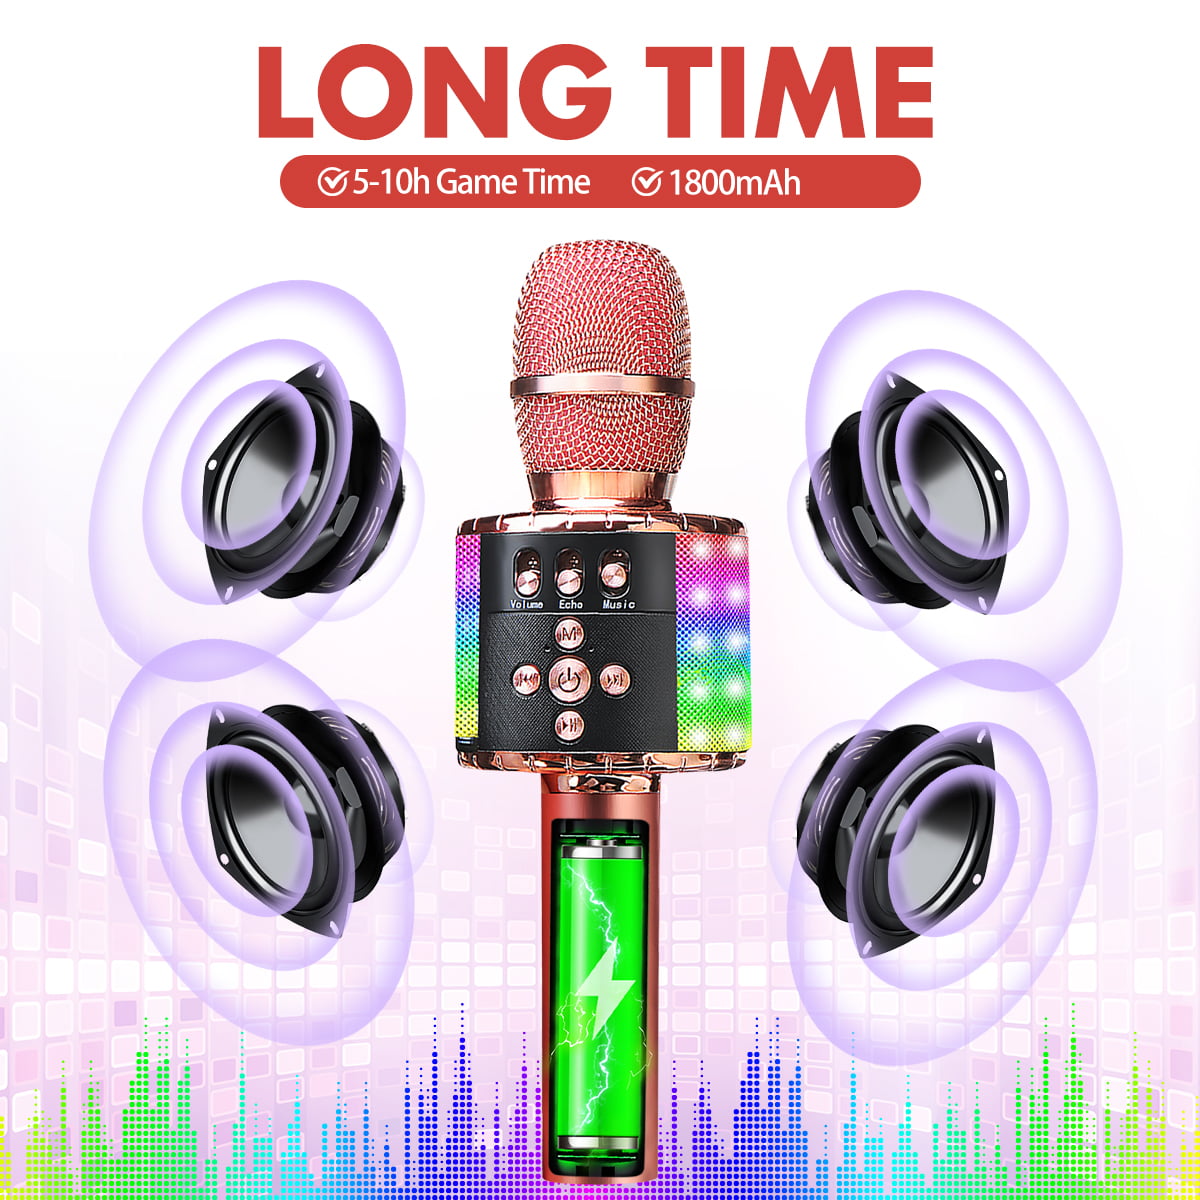 salon Accurate Inconvenience Karaoke Microphone,4 In 1 Wireless LED Karaoke Microphone with LED Lights,  Magic Voices, Long Playing Time, Noise Reduction, Songs Recording Functin,  Connect with Devices Apps, for Kids, Party Family - Walmart.com